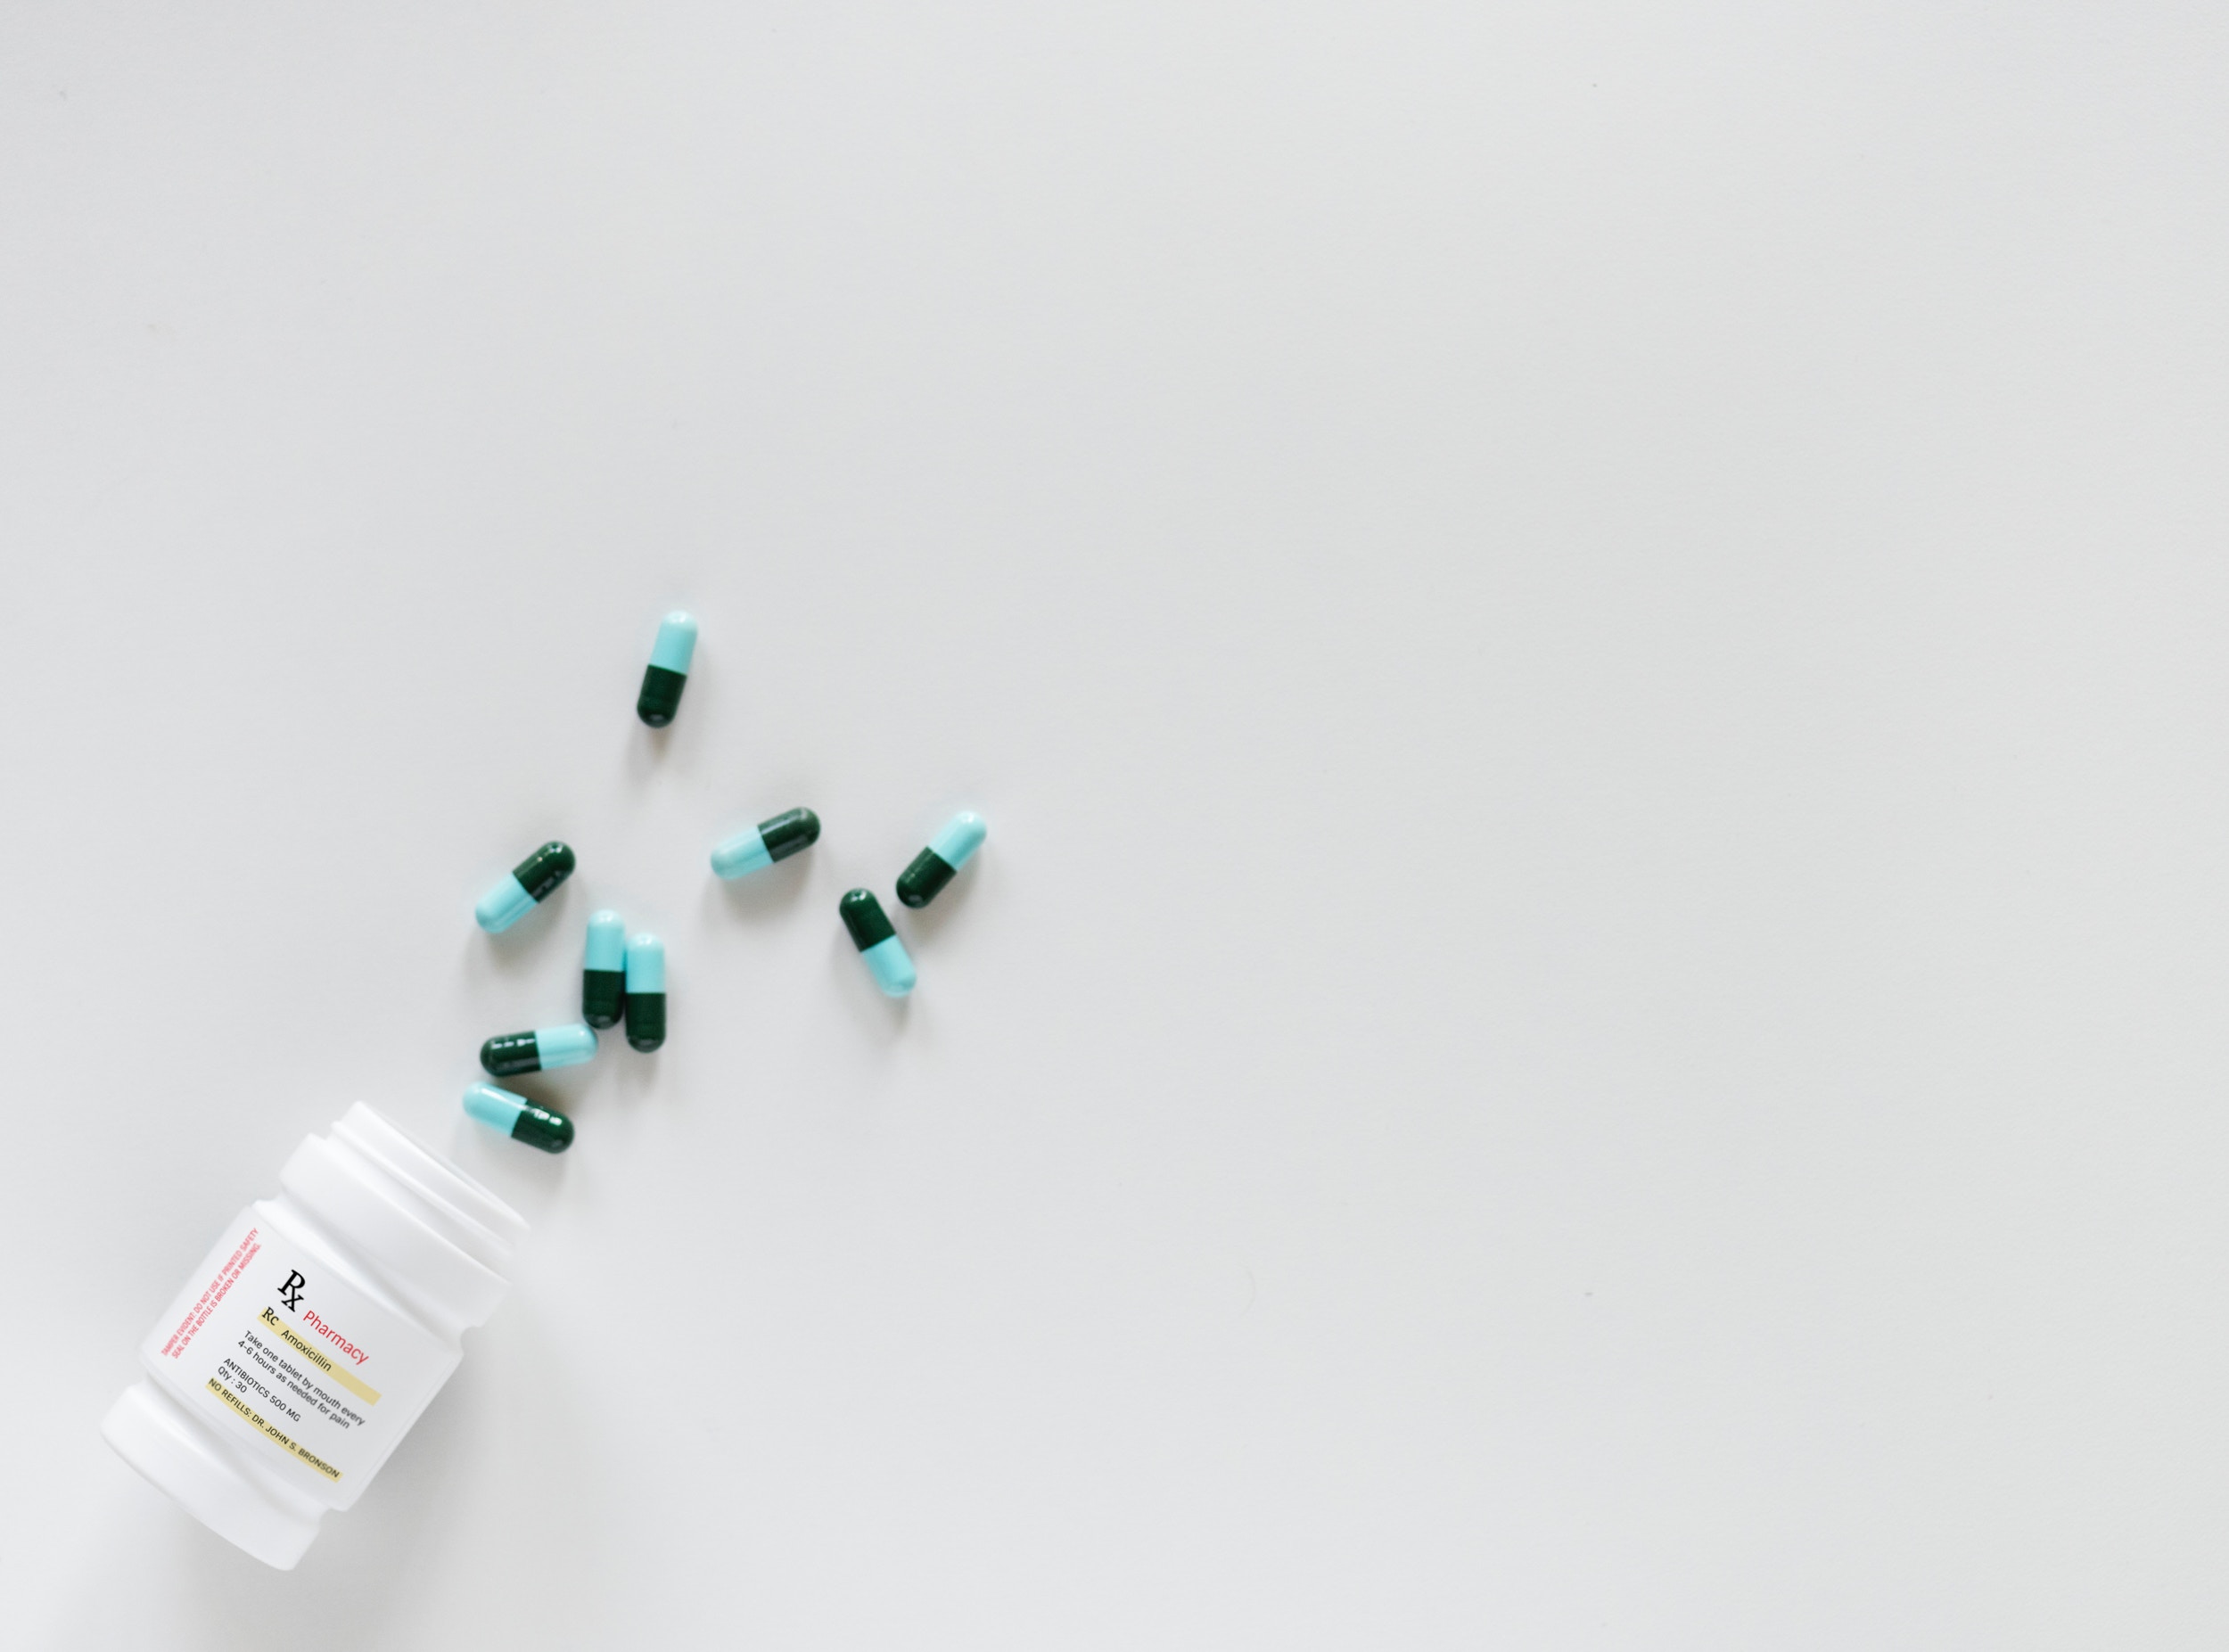 pills spilled out of bottle on table | product liability attorney